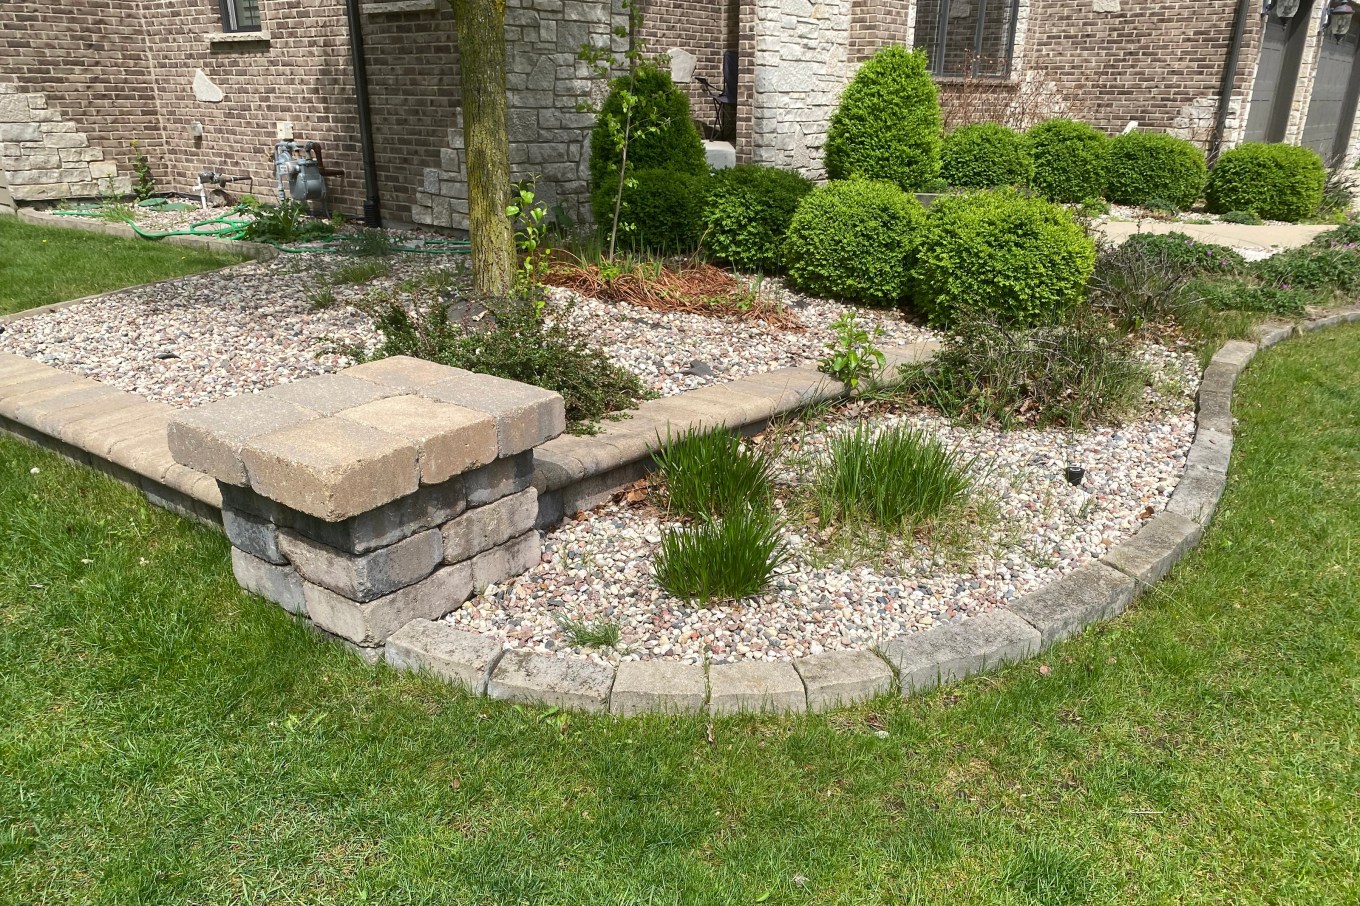 Edging of stone that separates the yard here from the shrubbery.